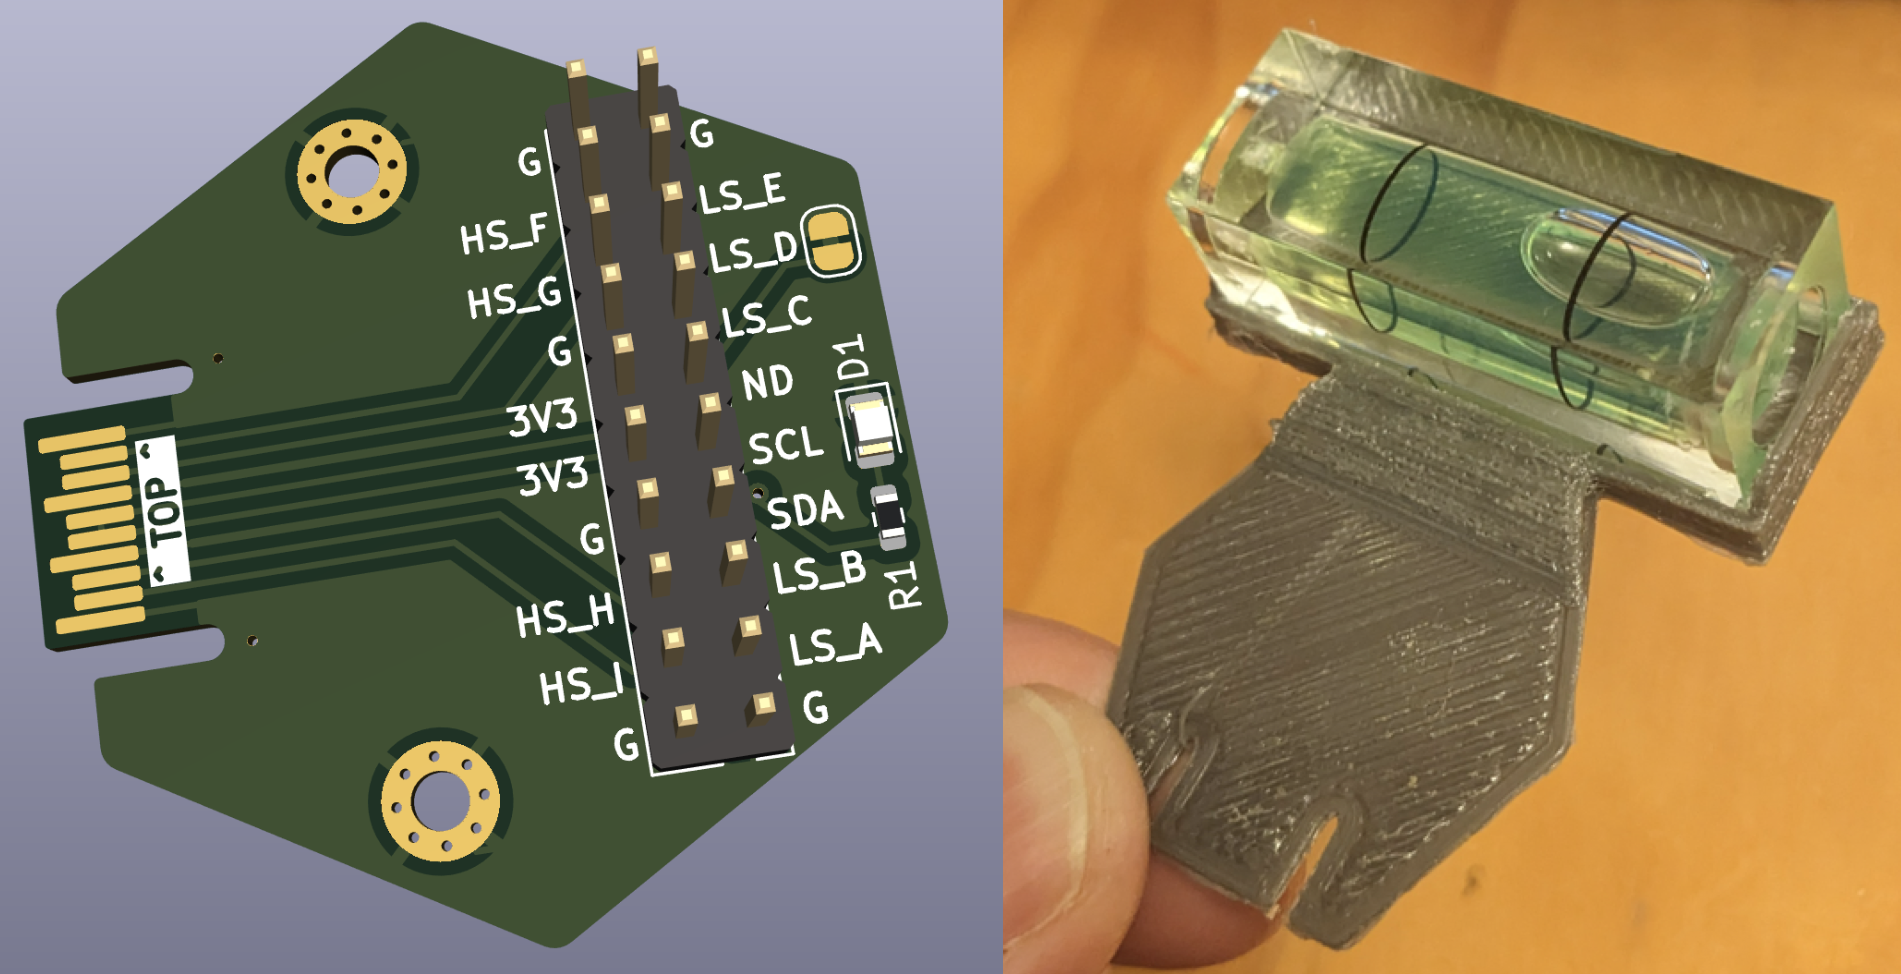 Two hexpansions, one a render of an example circuit board, the other a small spirit level, attached to a 3D printed hexagonal mount with notches to attach it to the badge.